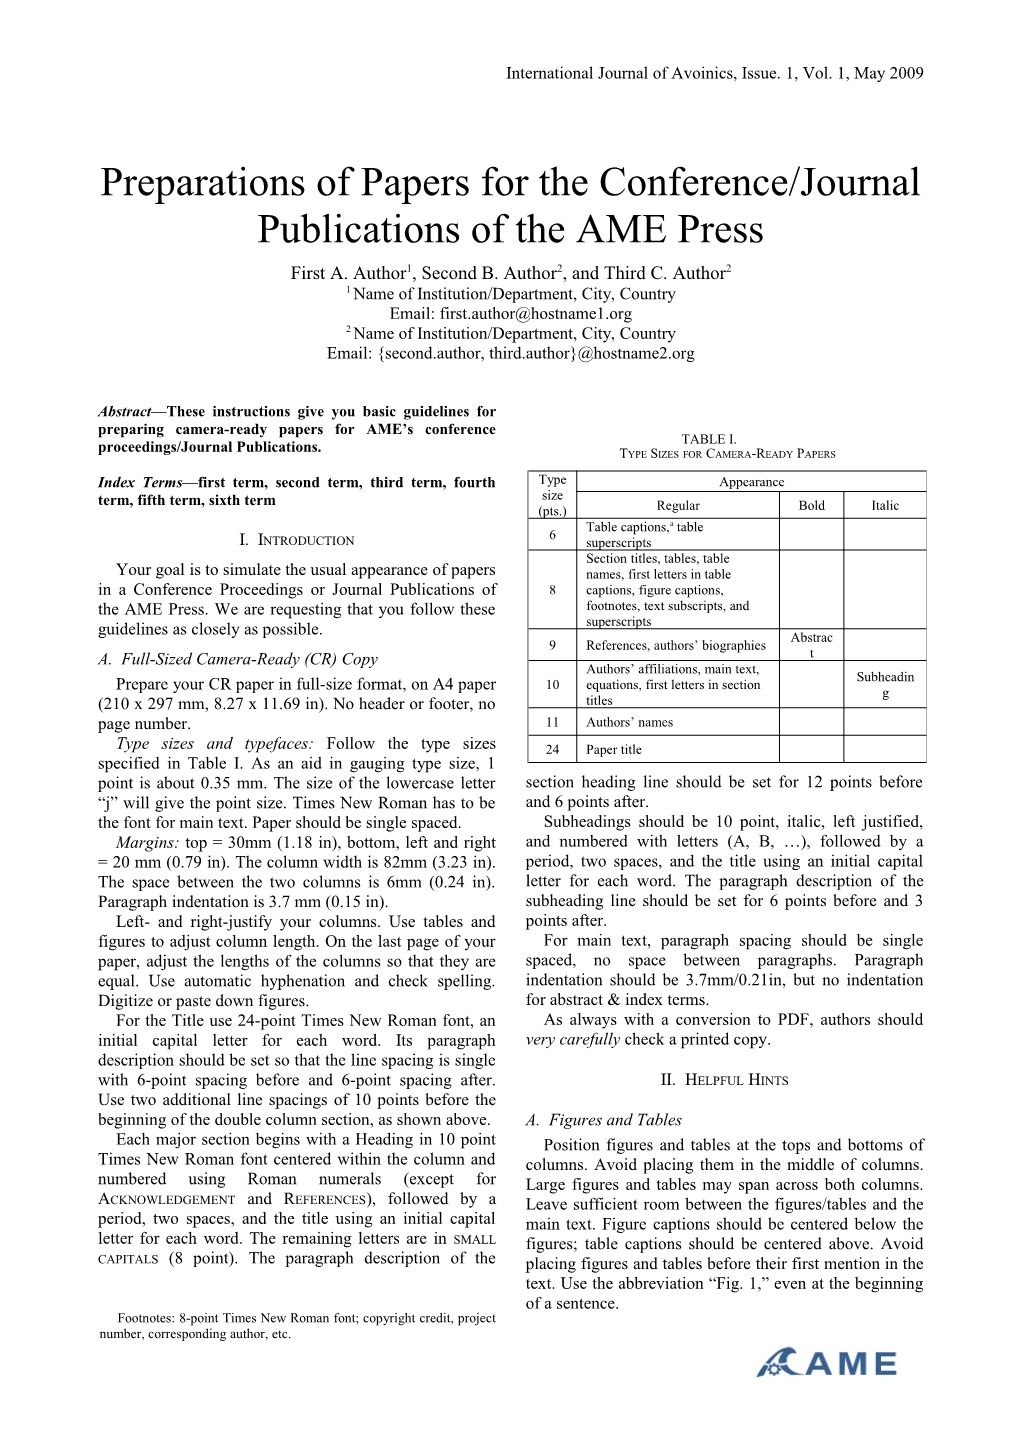 Preparations of Papers for the Conference/Journalpublications of the Amepress